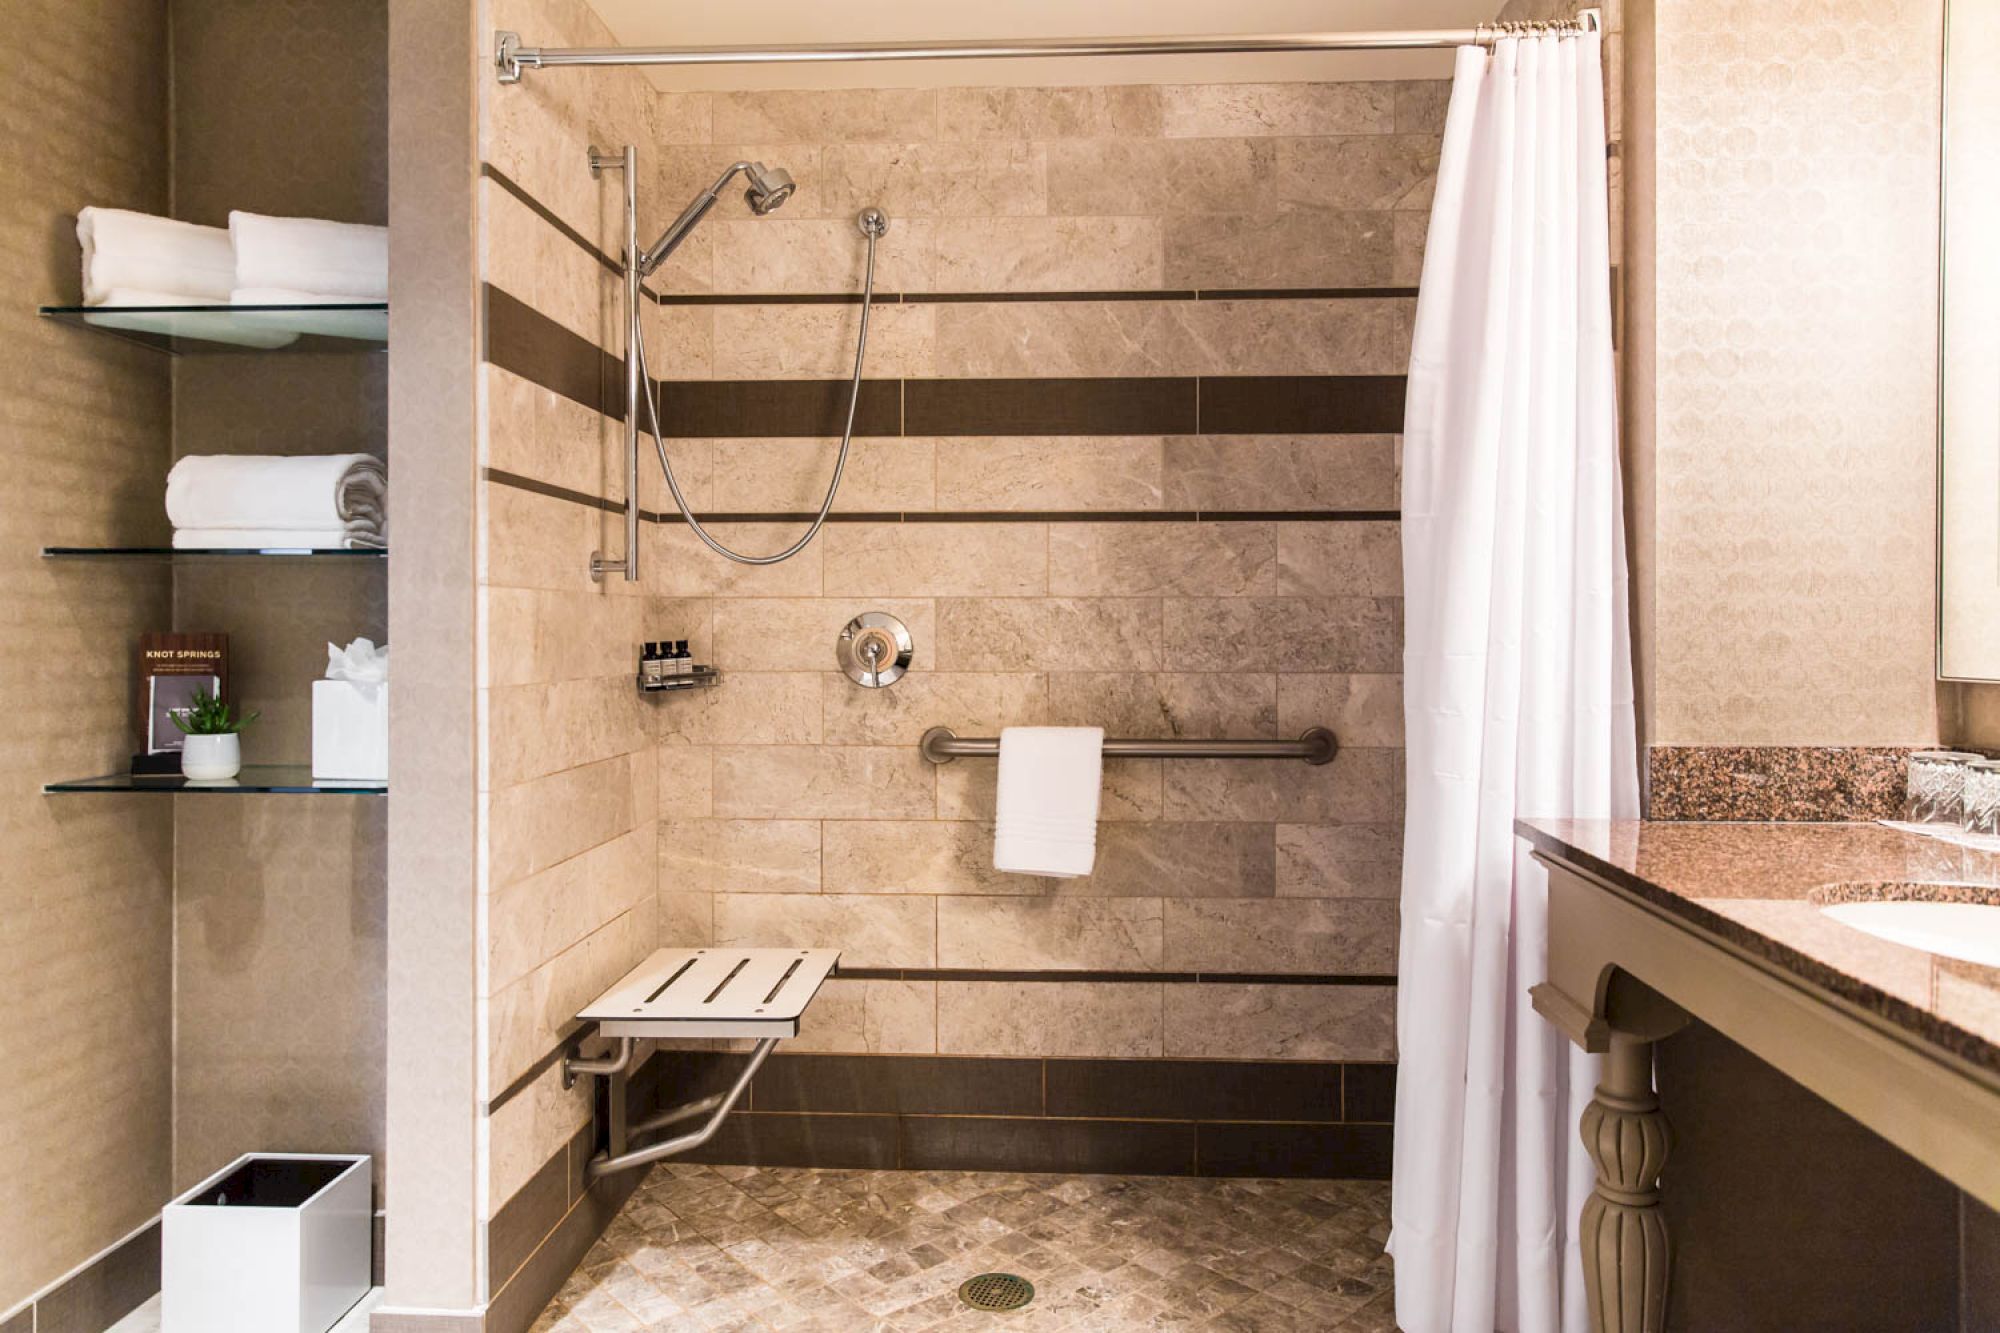 An accessible shower with a fold-out seat, grab bars, and a handheld showerhead. Nearby are shelves with towels and toiletries, ending the sentence.